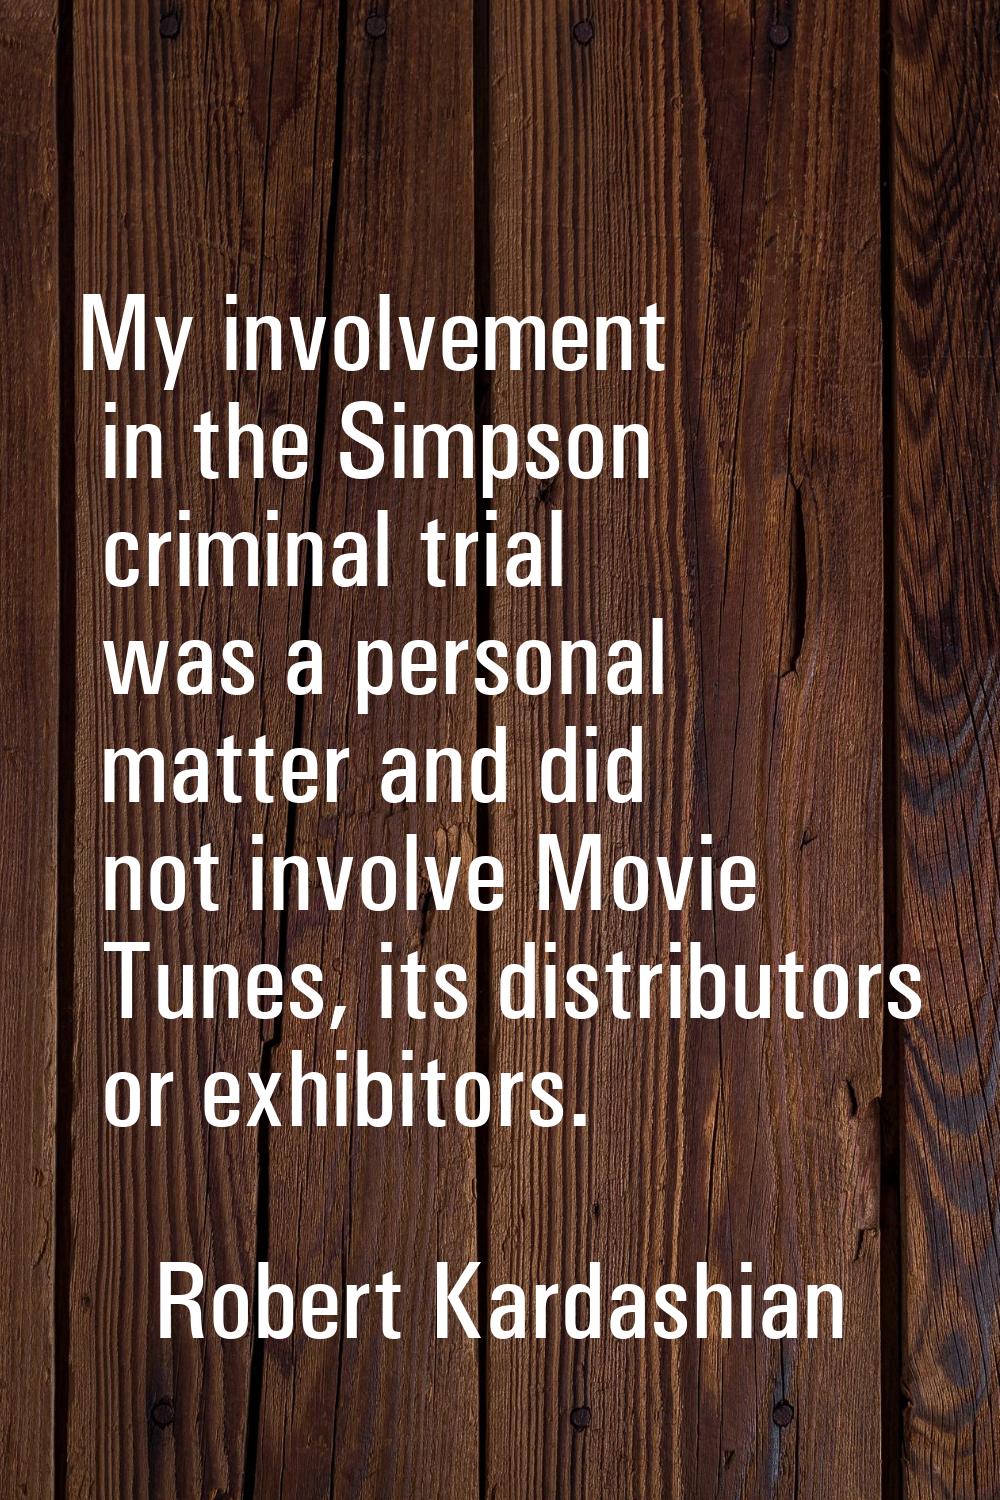 My involvement in the Simpson criminal trial was a personal matter and did not involve Movie Tunes,